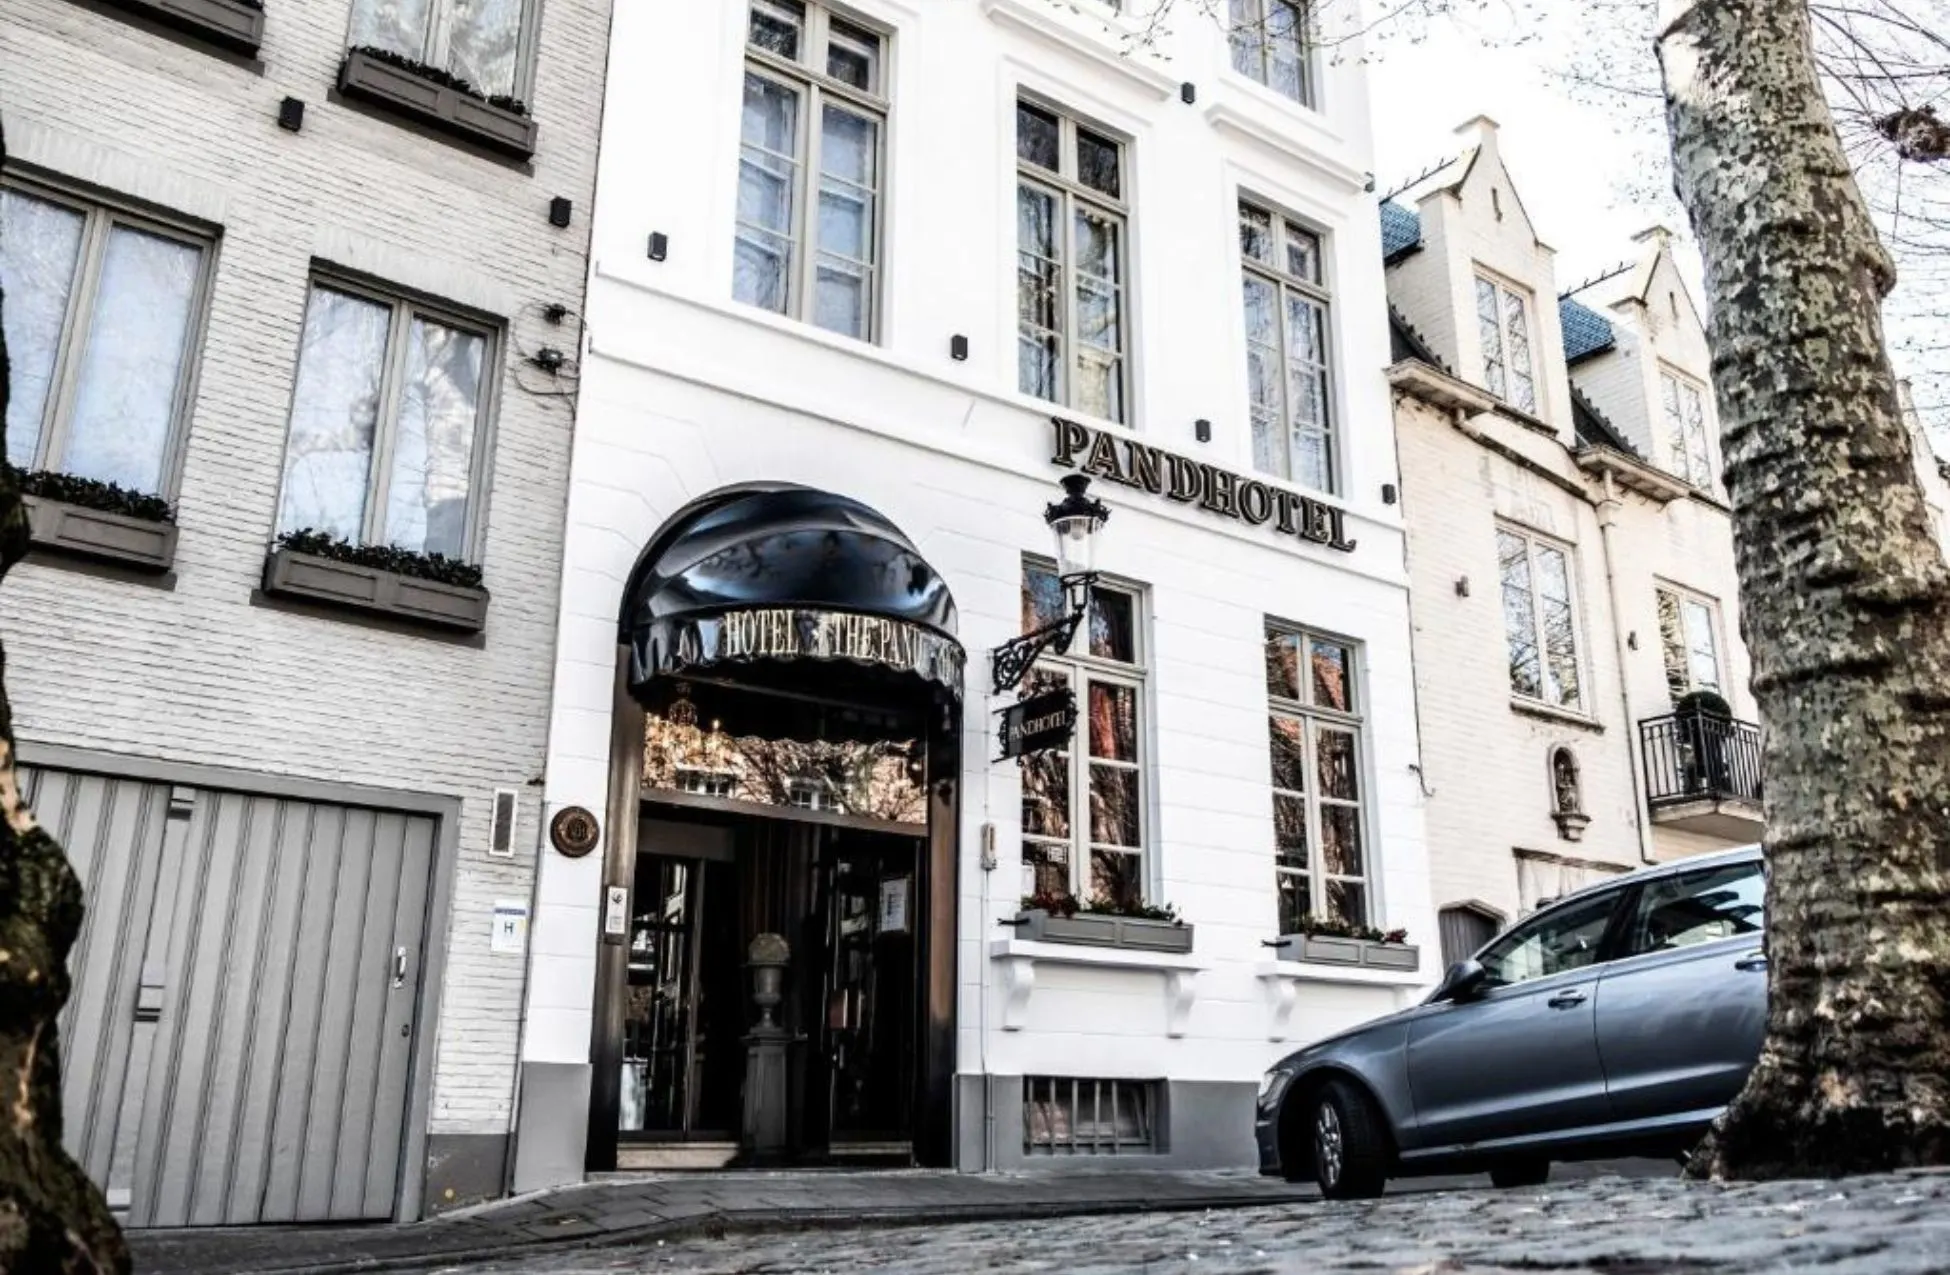 The Pand Hotel - Best Hotels In Bruges